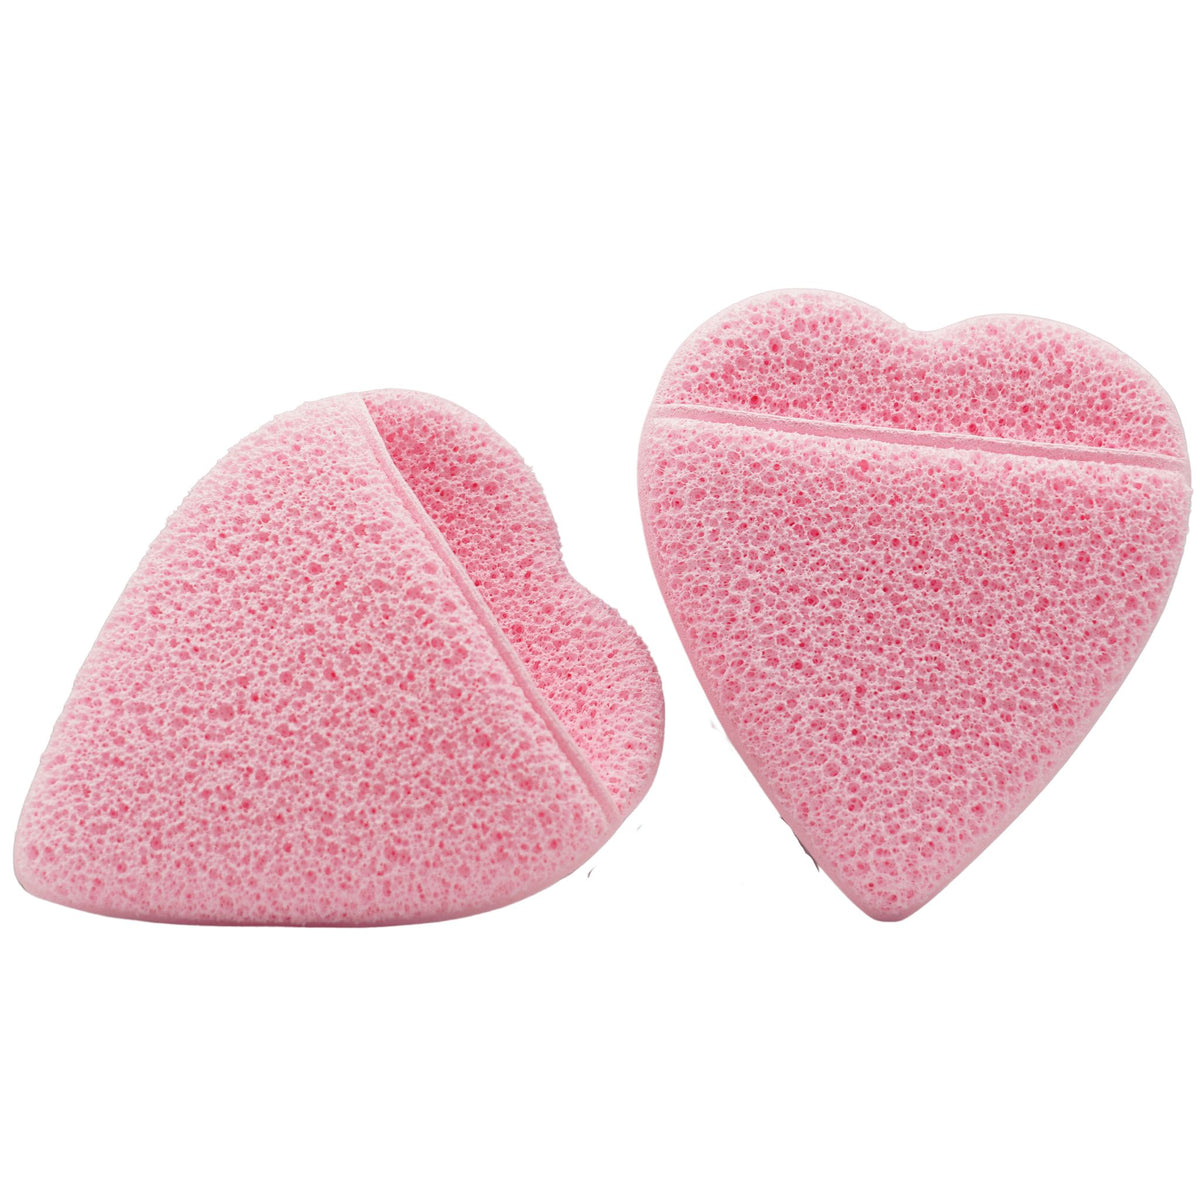 CityColor Silicone Makeup Sponge Set - 2 Sponges For Flawless